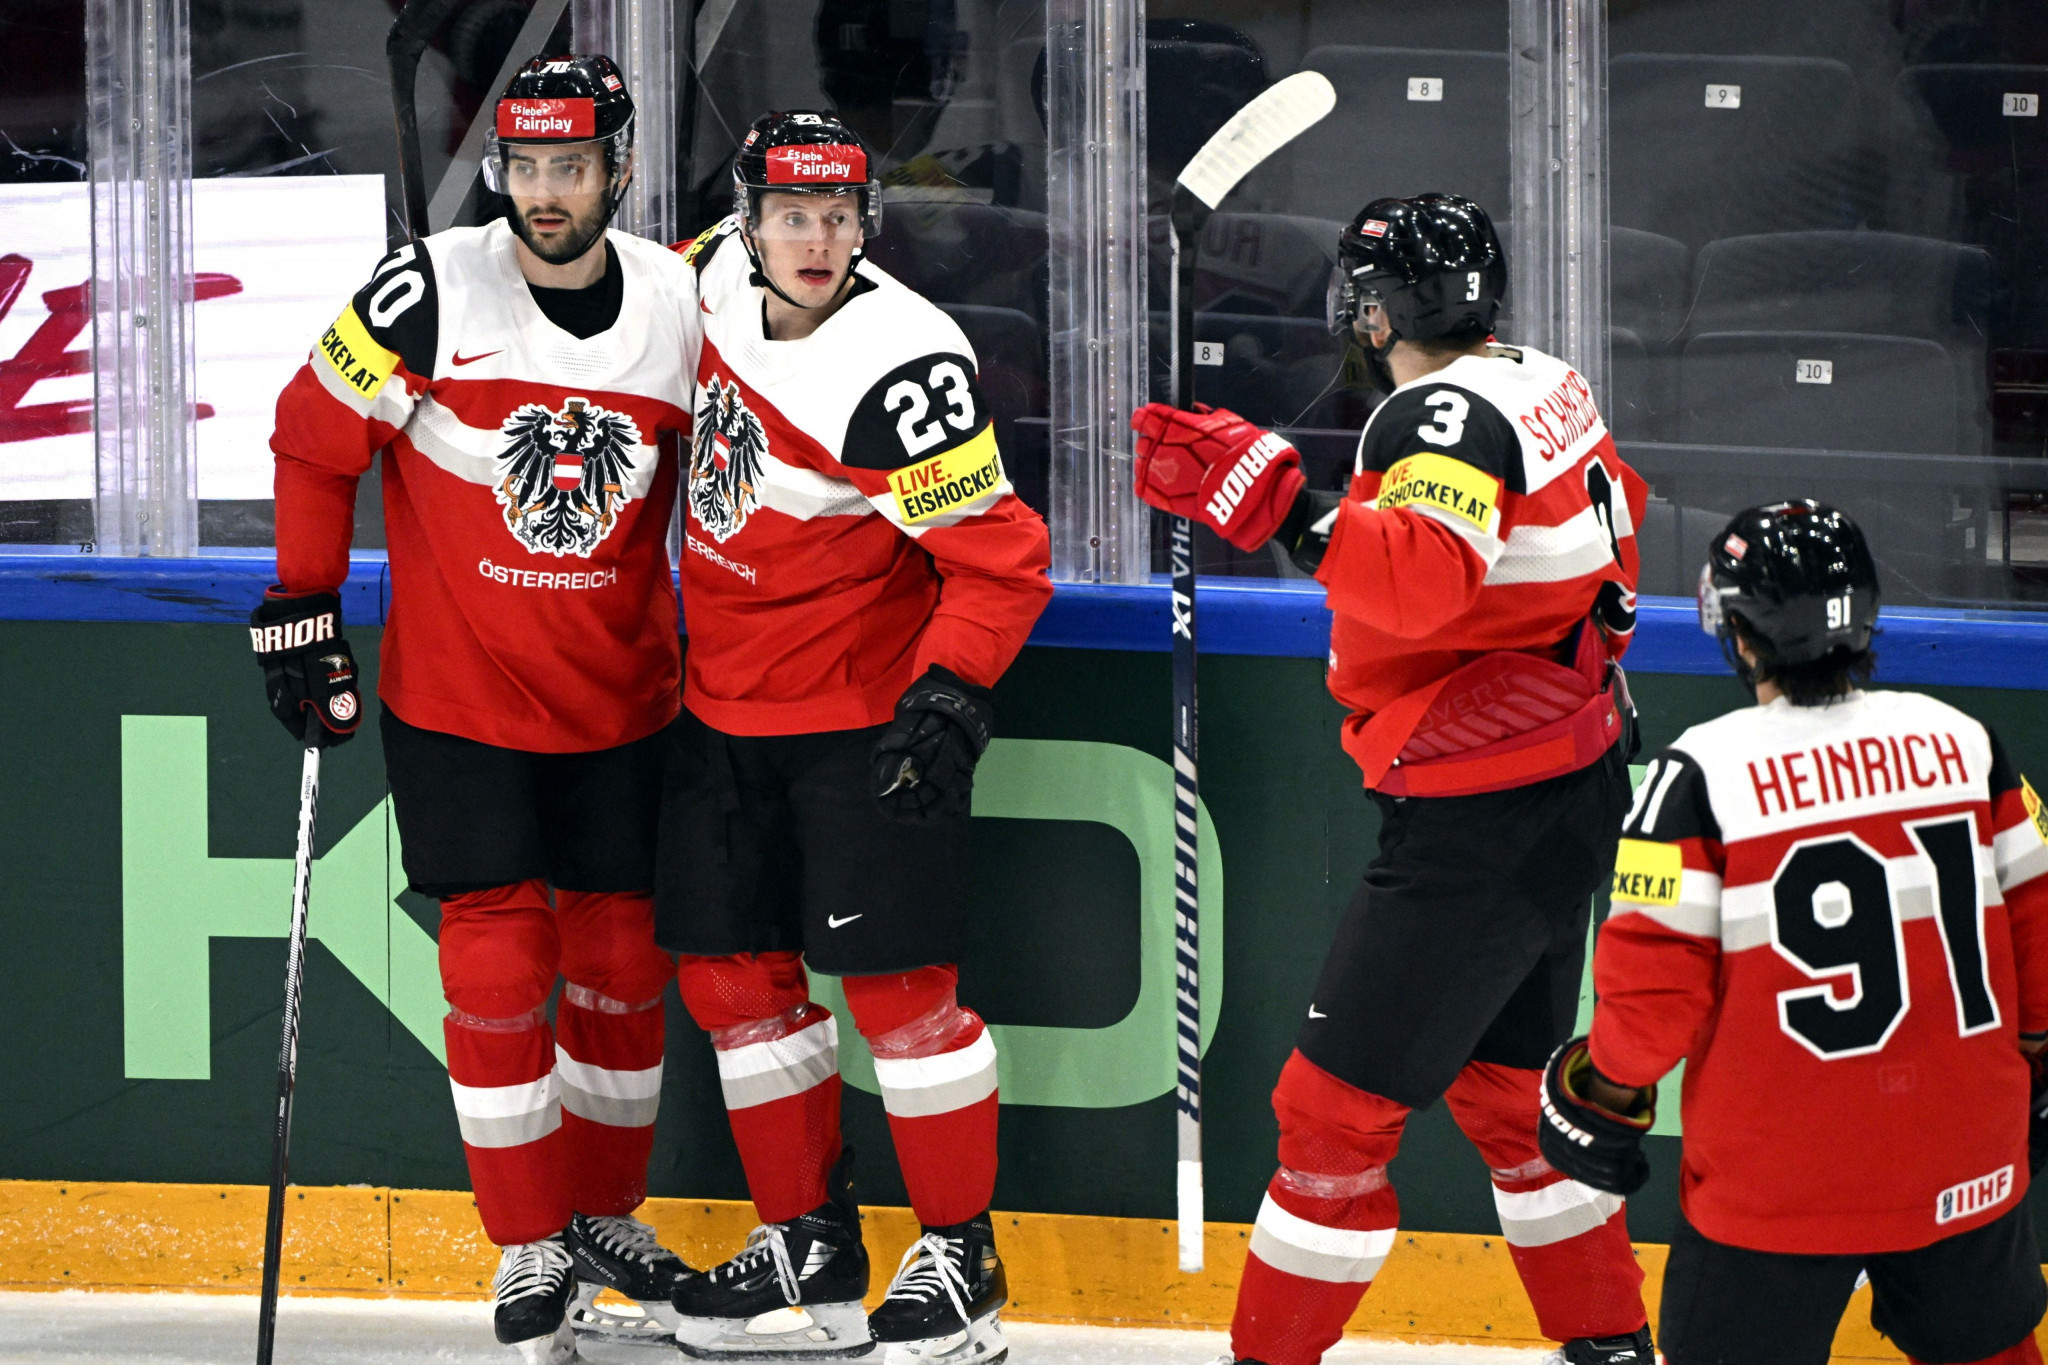 Austria avoid relegation at IIHF World Championship as shootout win sends Hungary down